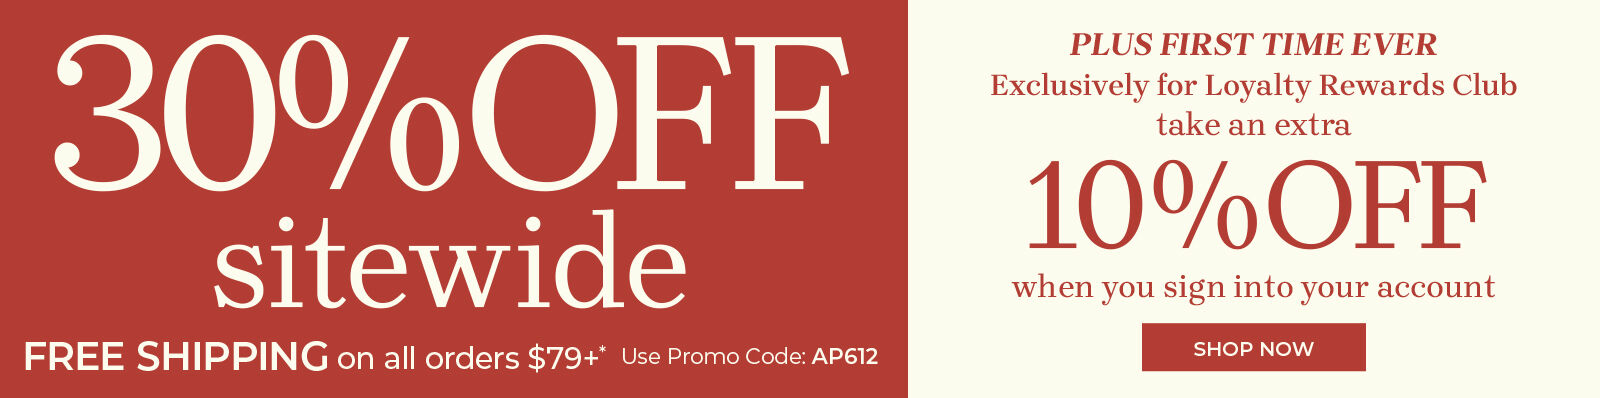 30% off sitewide & free shipping on all orders $79+ use promo vode: AP612 shop now plus for the first time ever exclusively for loyalty rewards club take an extra 10% off when you sign into your account